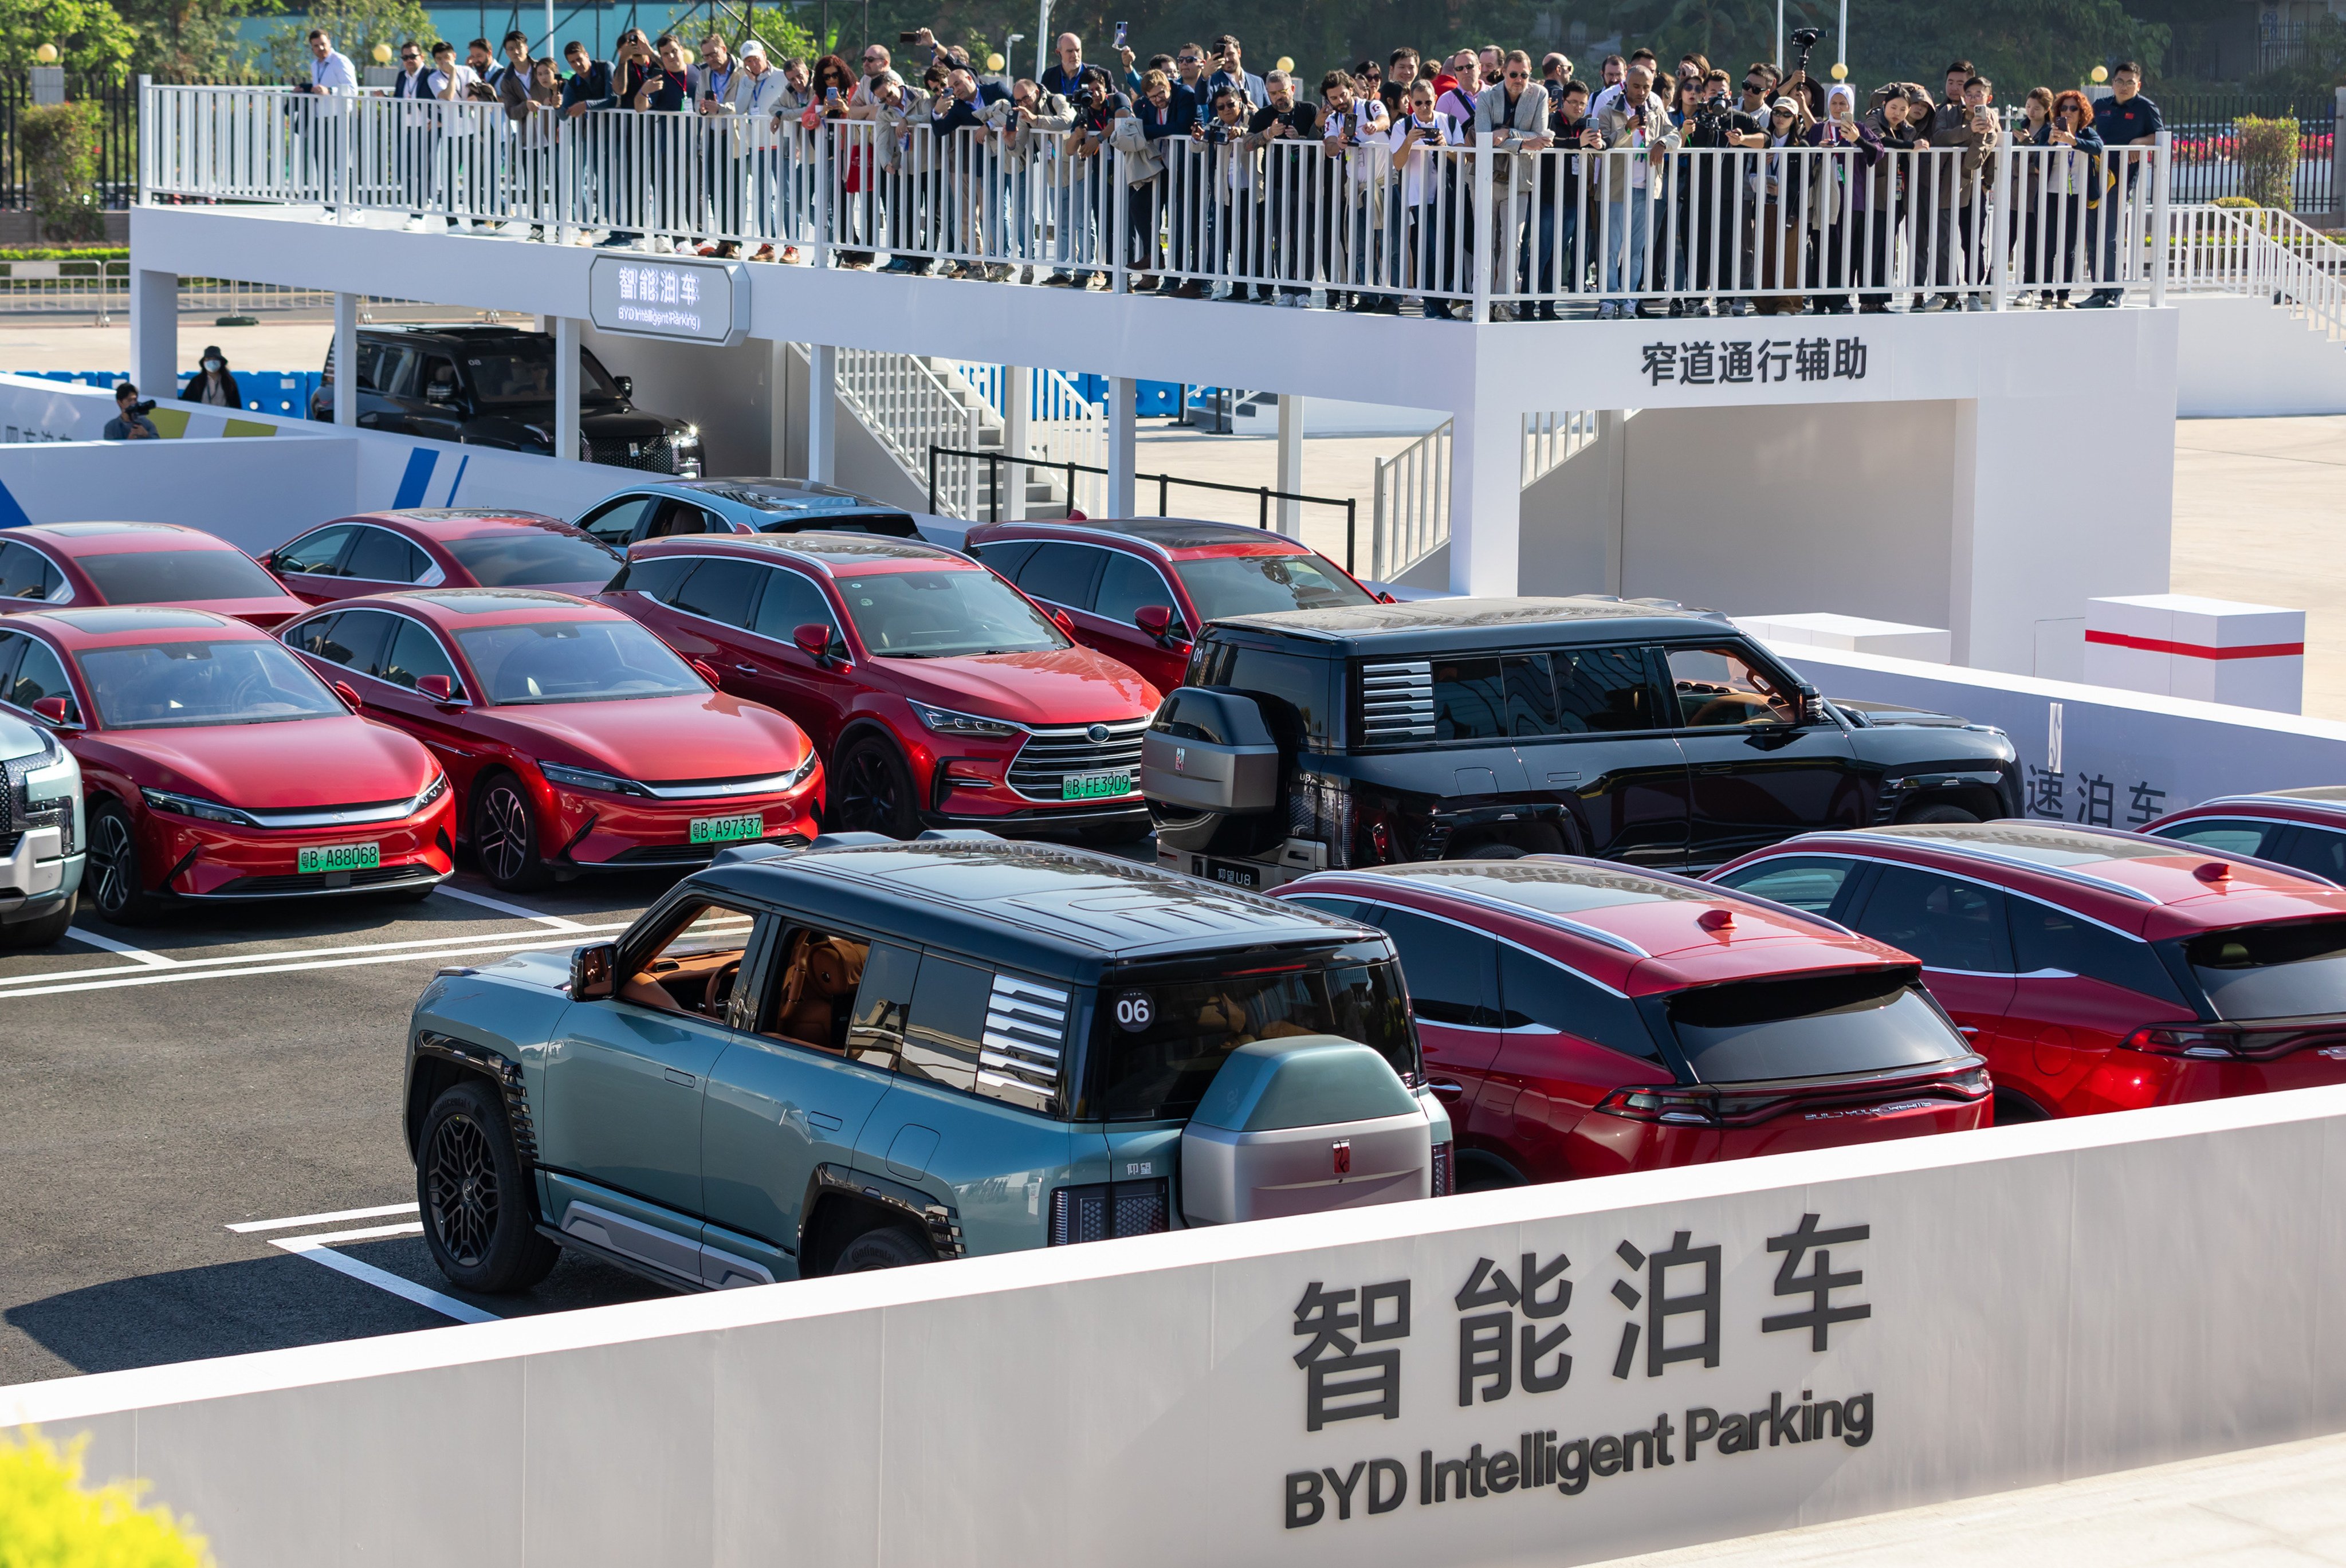 BYD yesterday showed off its intelligent parking features at its Dream Day event in Shenzhen on Tuesday. Photo: Handout